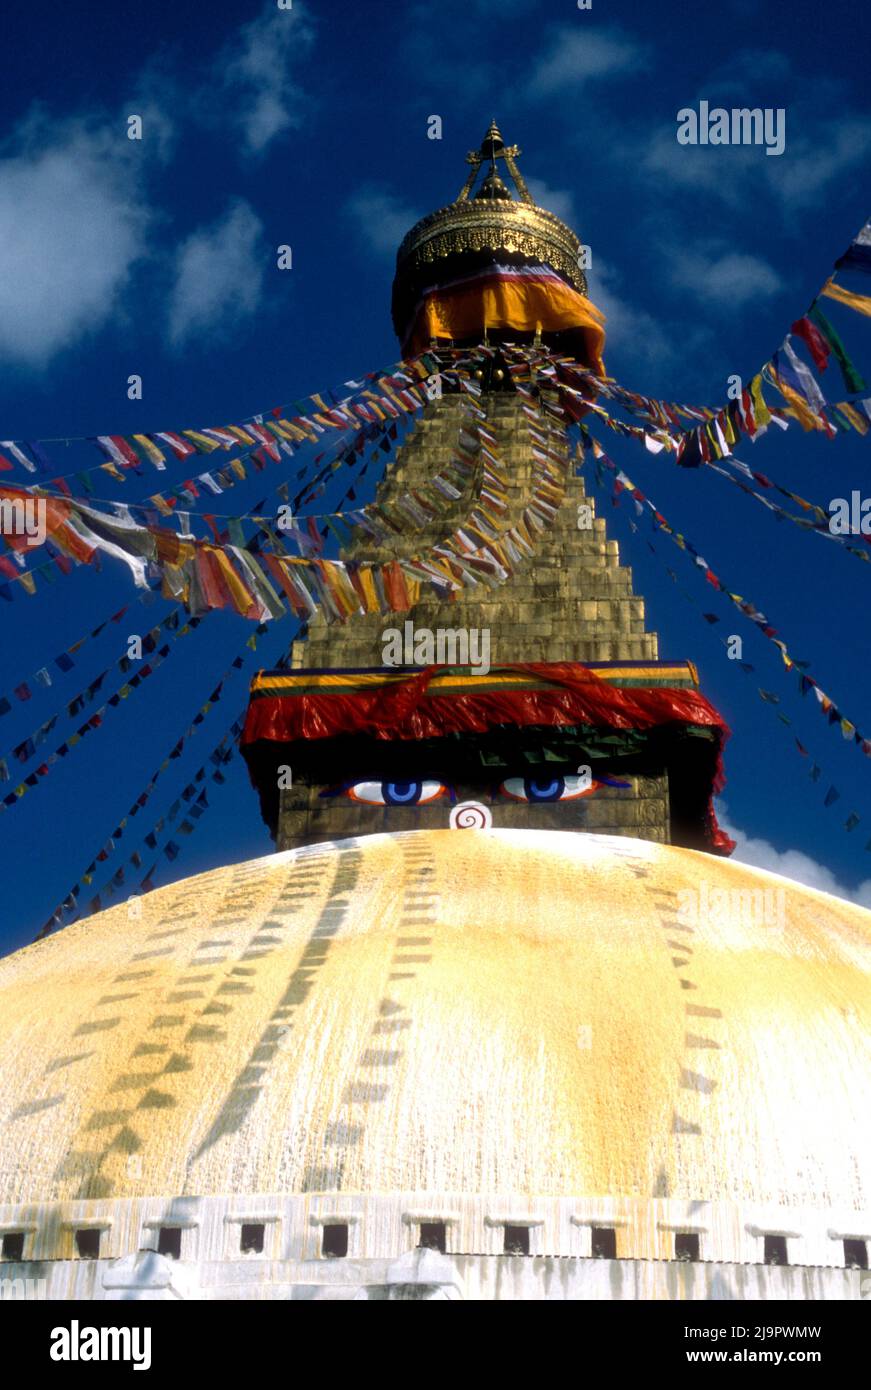 Boudhananth Stupa  built in the late 6th century CE by a king of the Nepalese Licchavi Kingdom, Kathmandu, Nepal Stock Photo